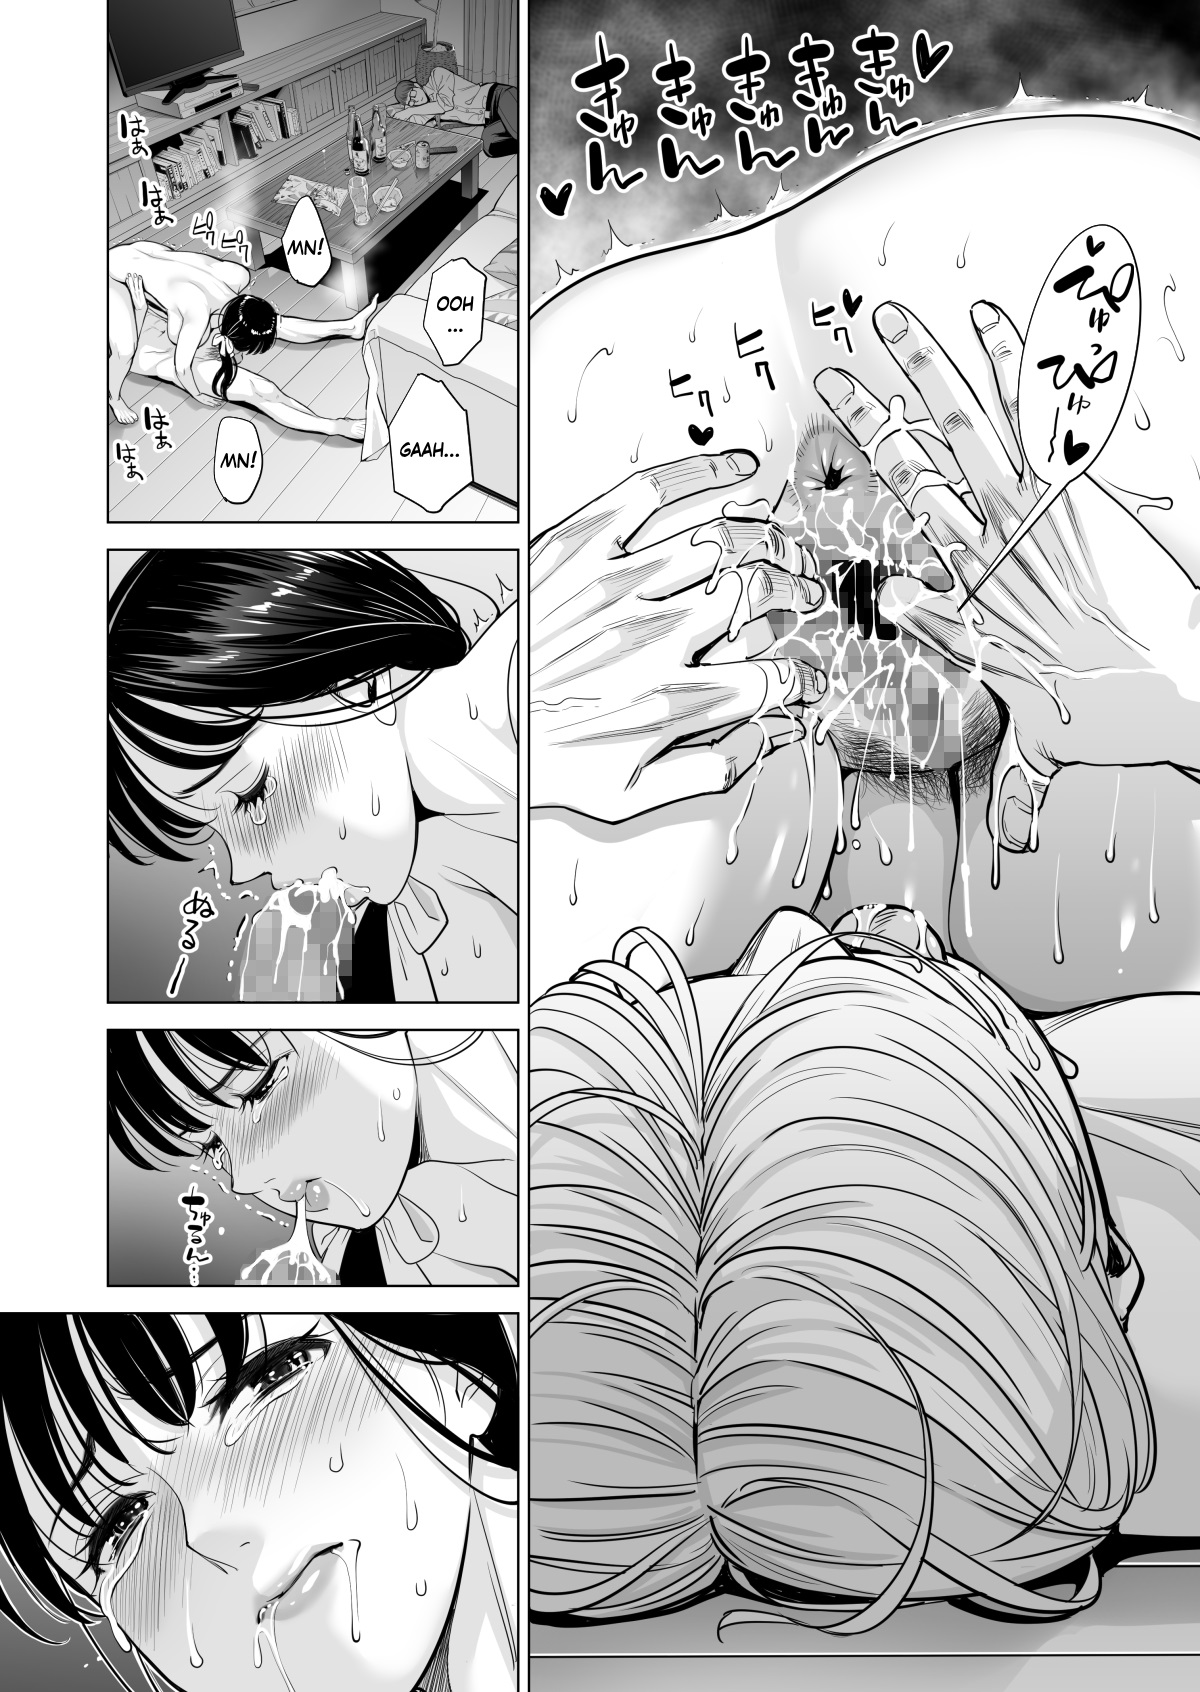 Tsukiyo no Midare Zake  Moonlit Intoxication ~ A Housewife Stolen by a Coworker Besides her Blackout Drunk Husband ~ Chapter 1 numero d'image 57